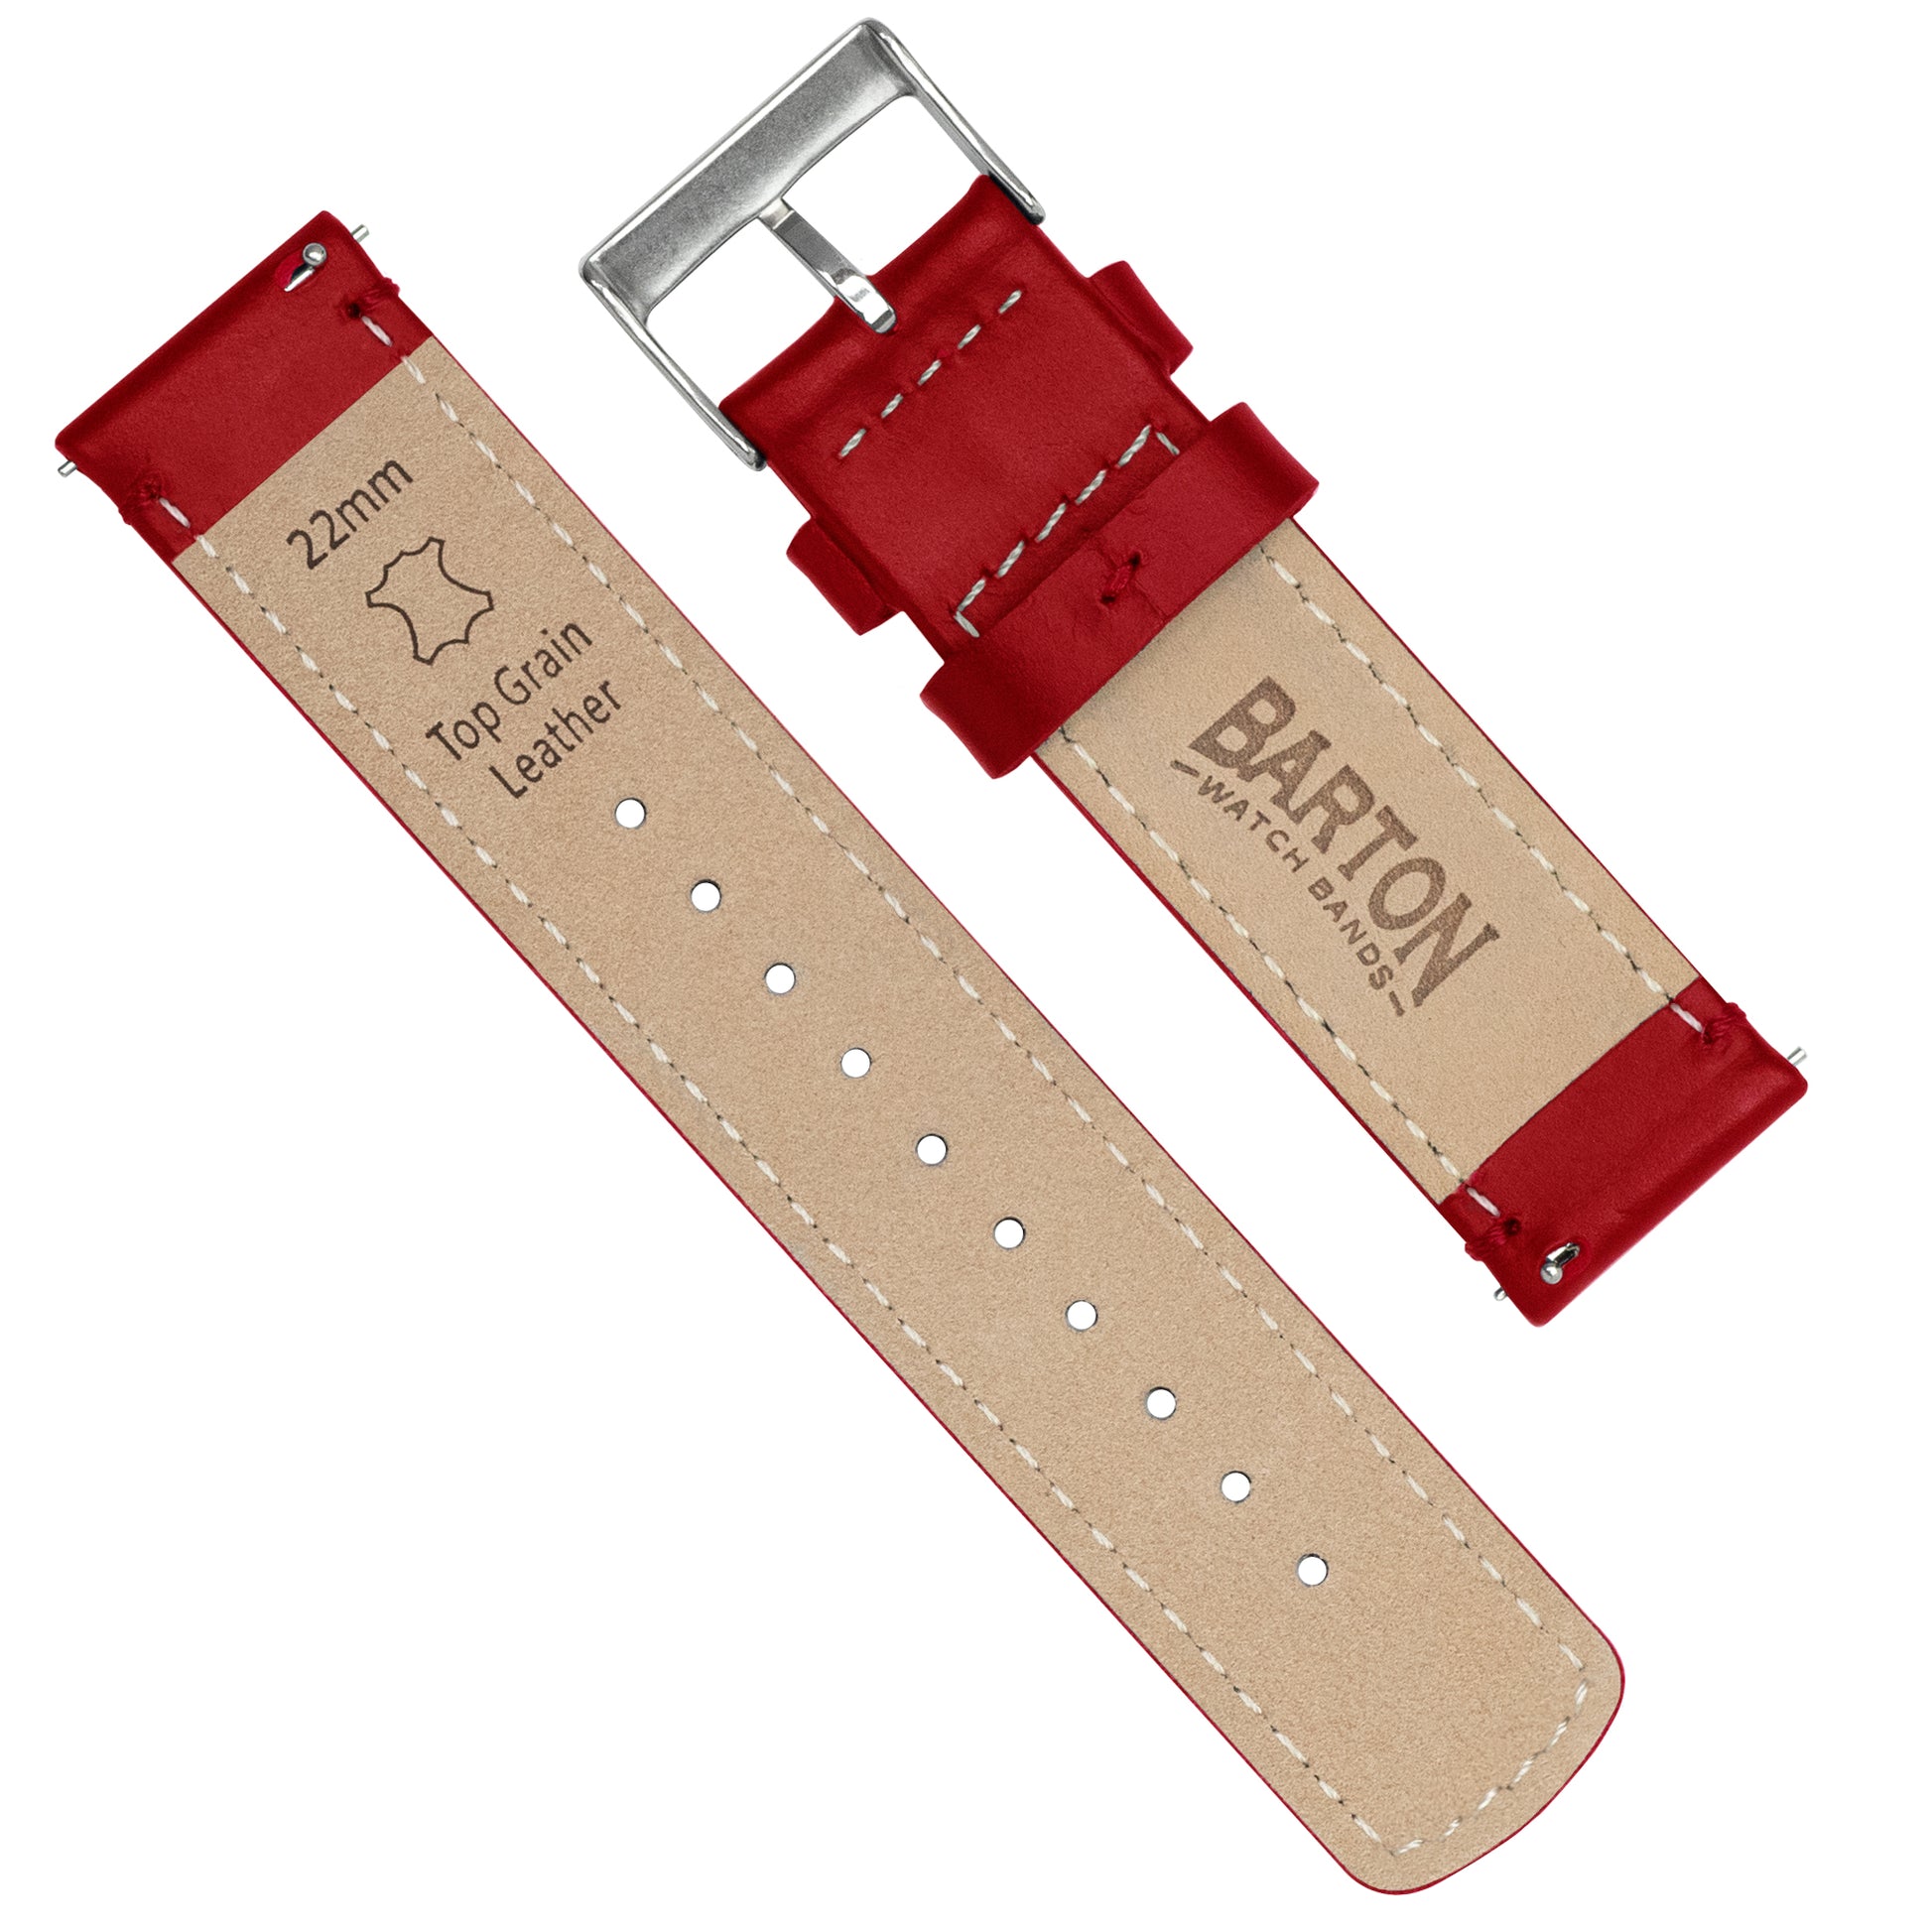 Withings Nokia Activité and Steel HR | Red Leather &  Stitching - Barton Watch Bands